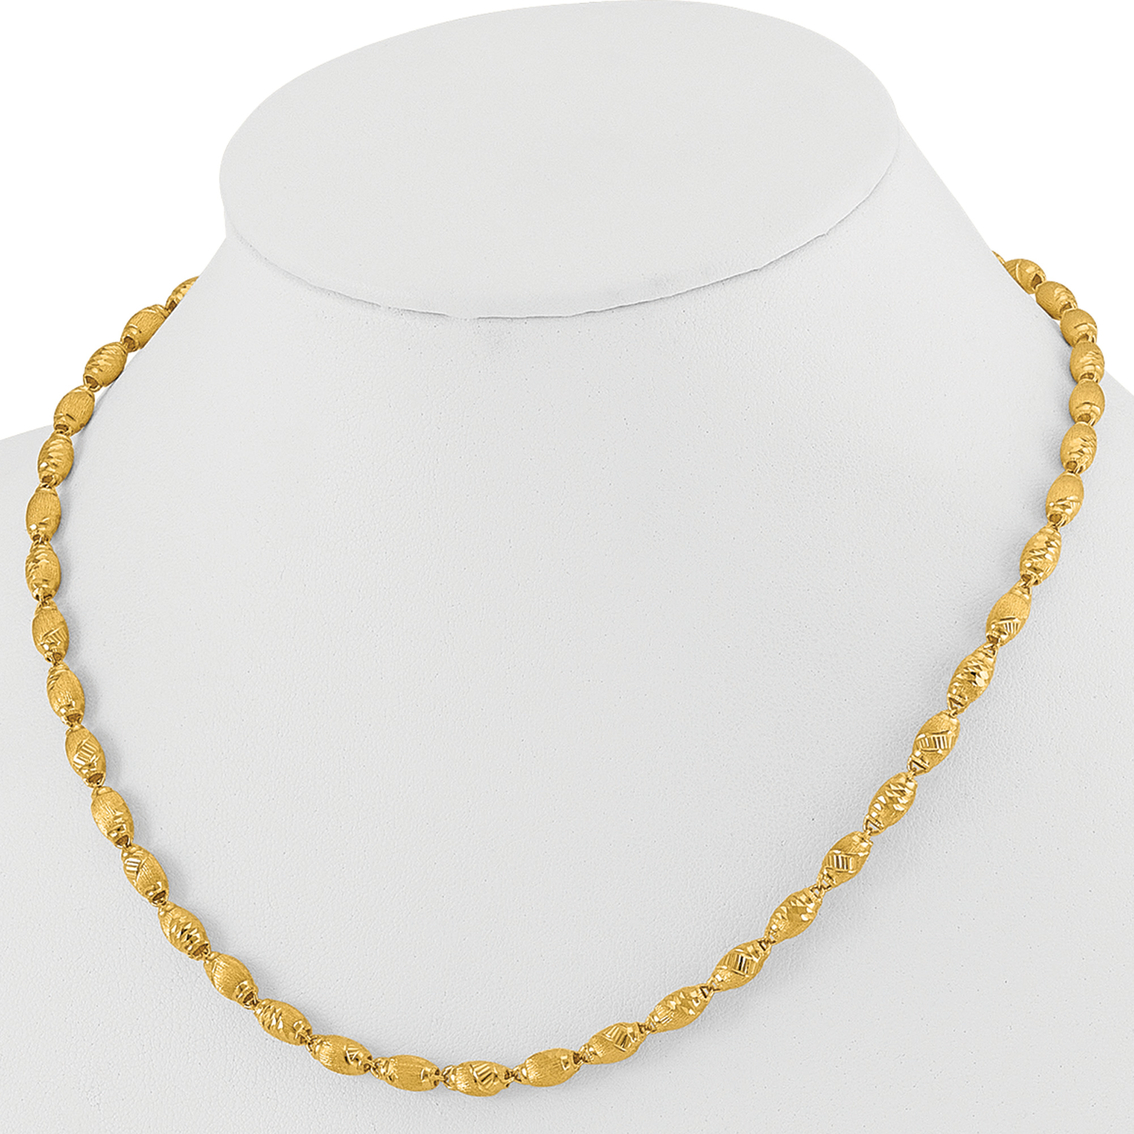 24K Pure Gold Link Necklace 18 in. - Image 3 of 4